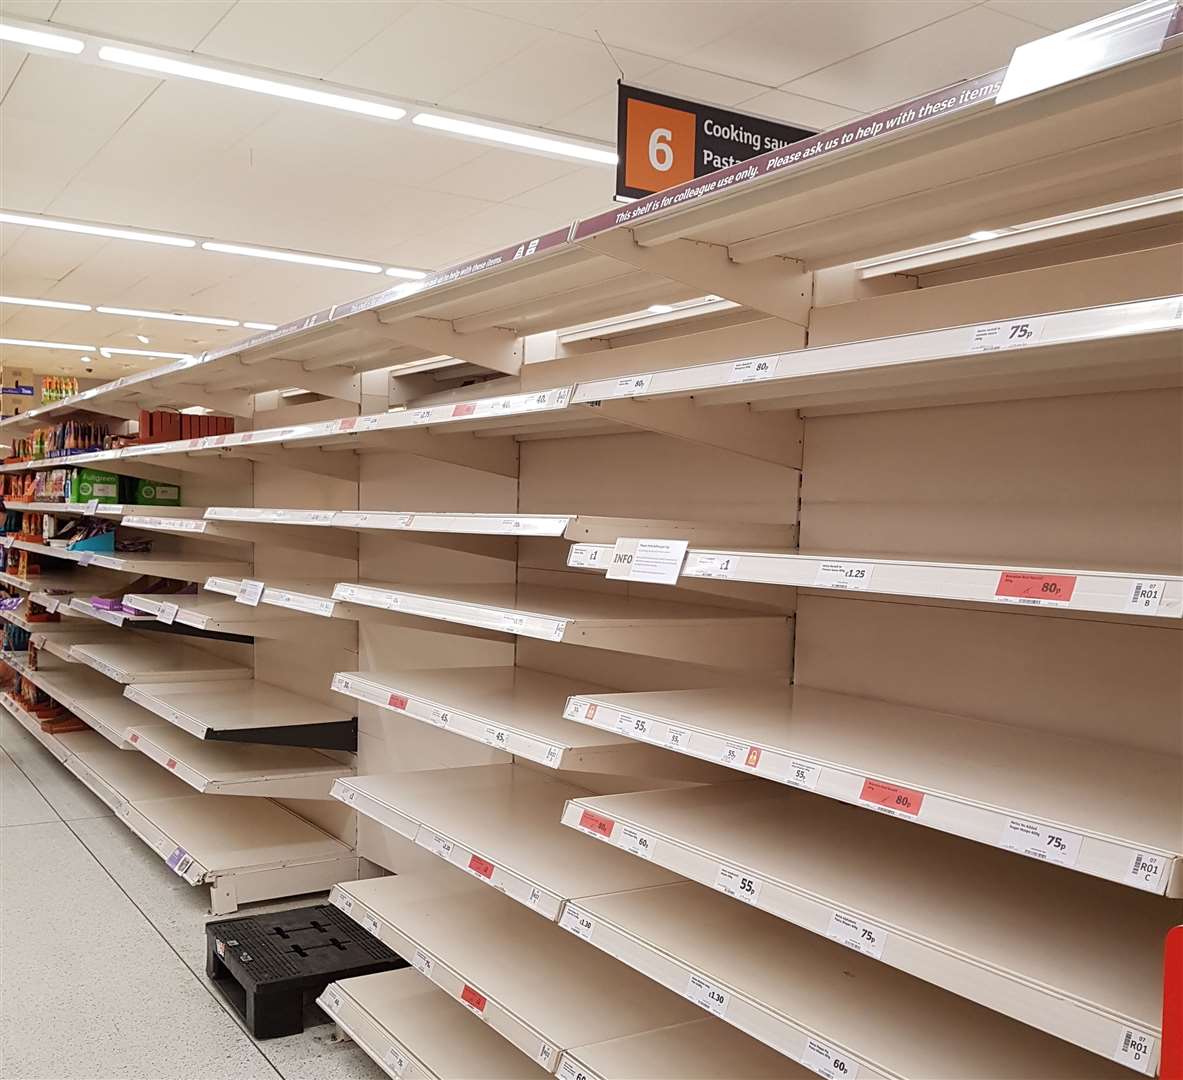 Shelves were emptied at Sainsbury's in Maidstone